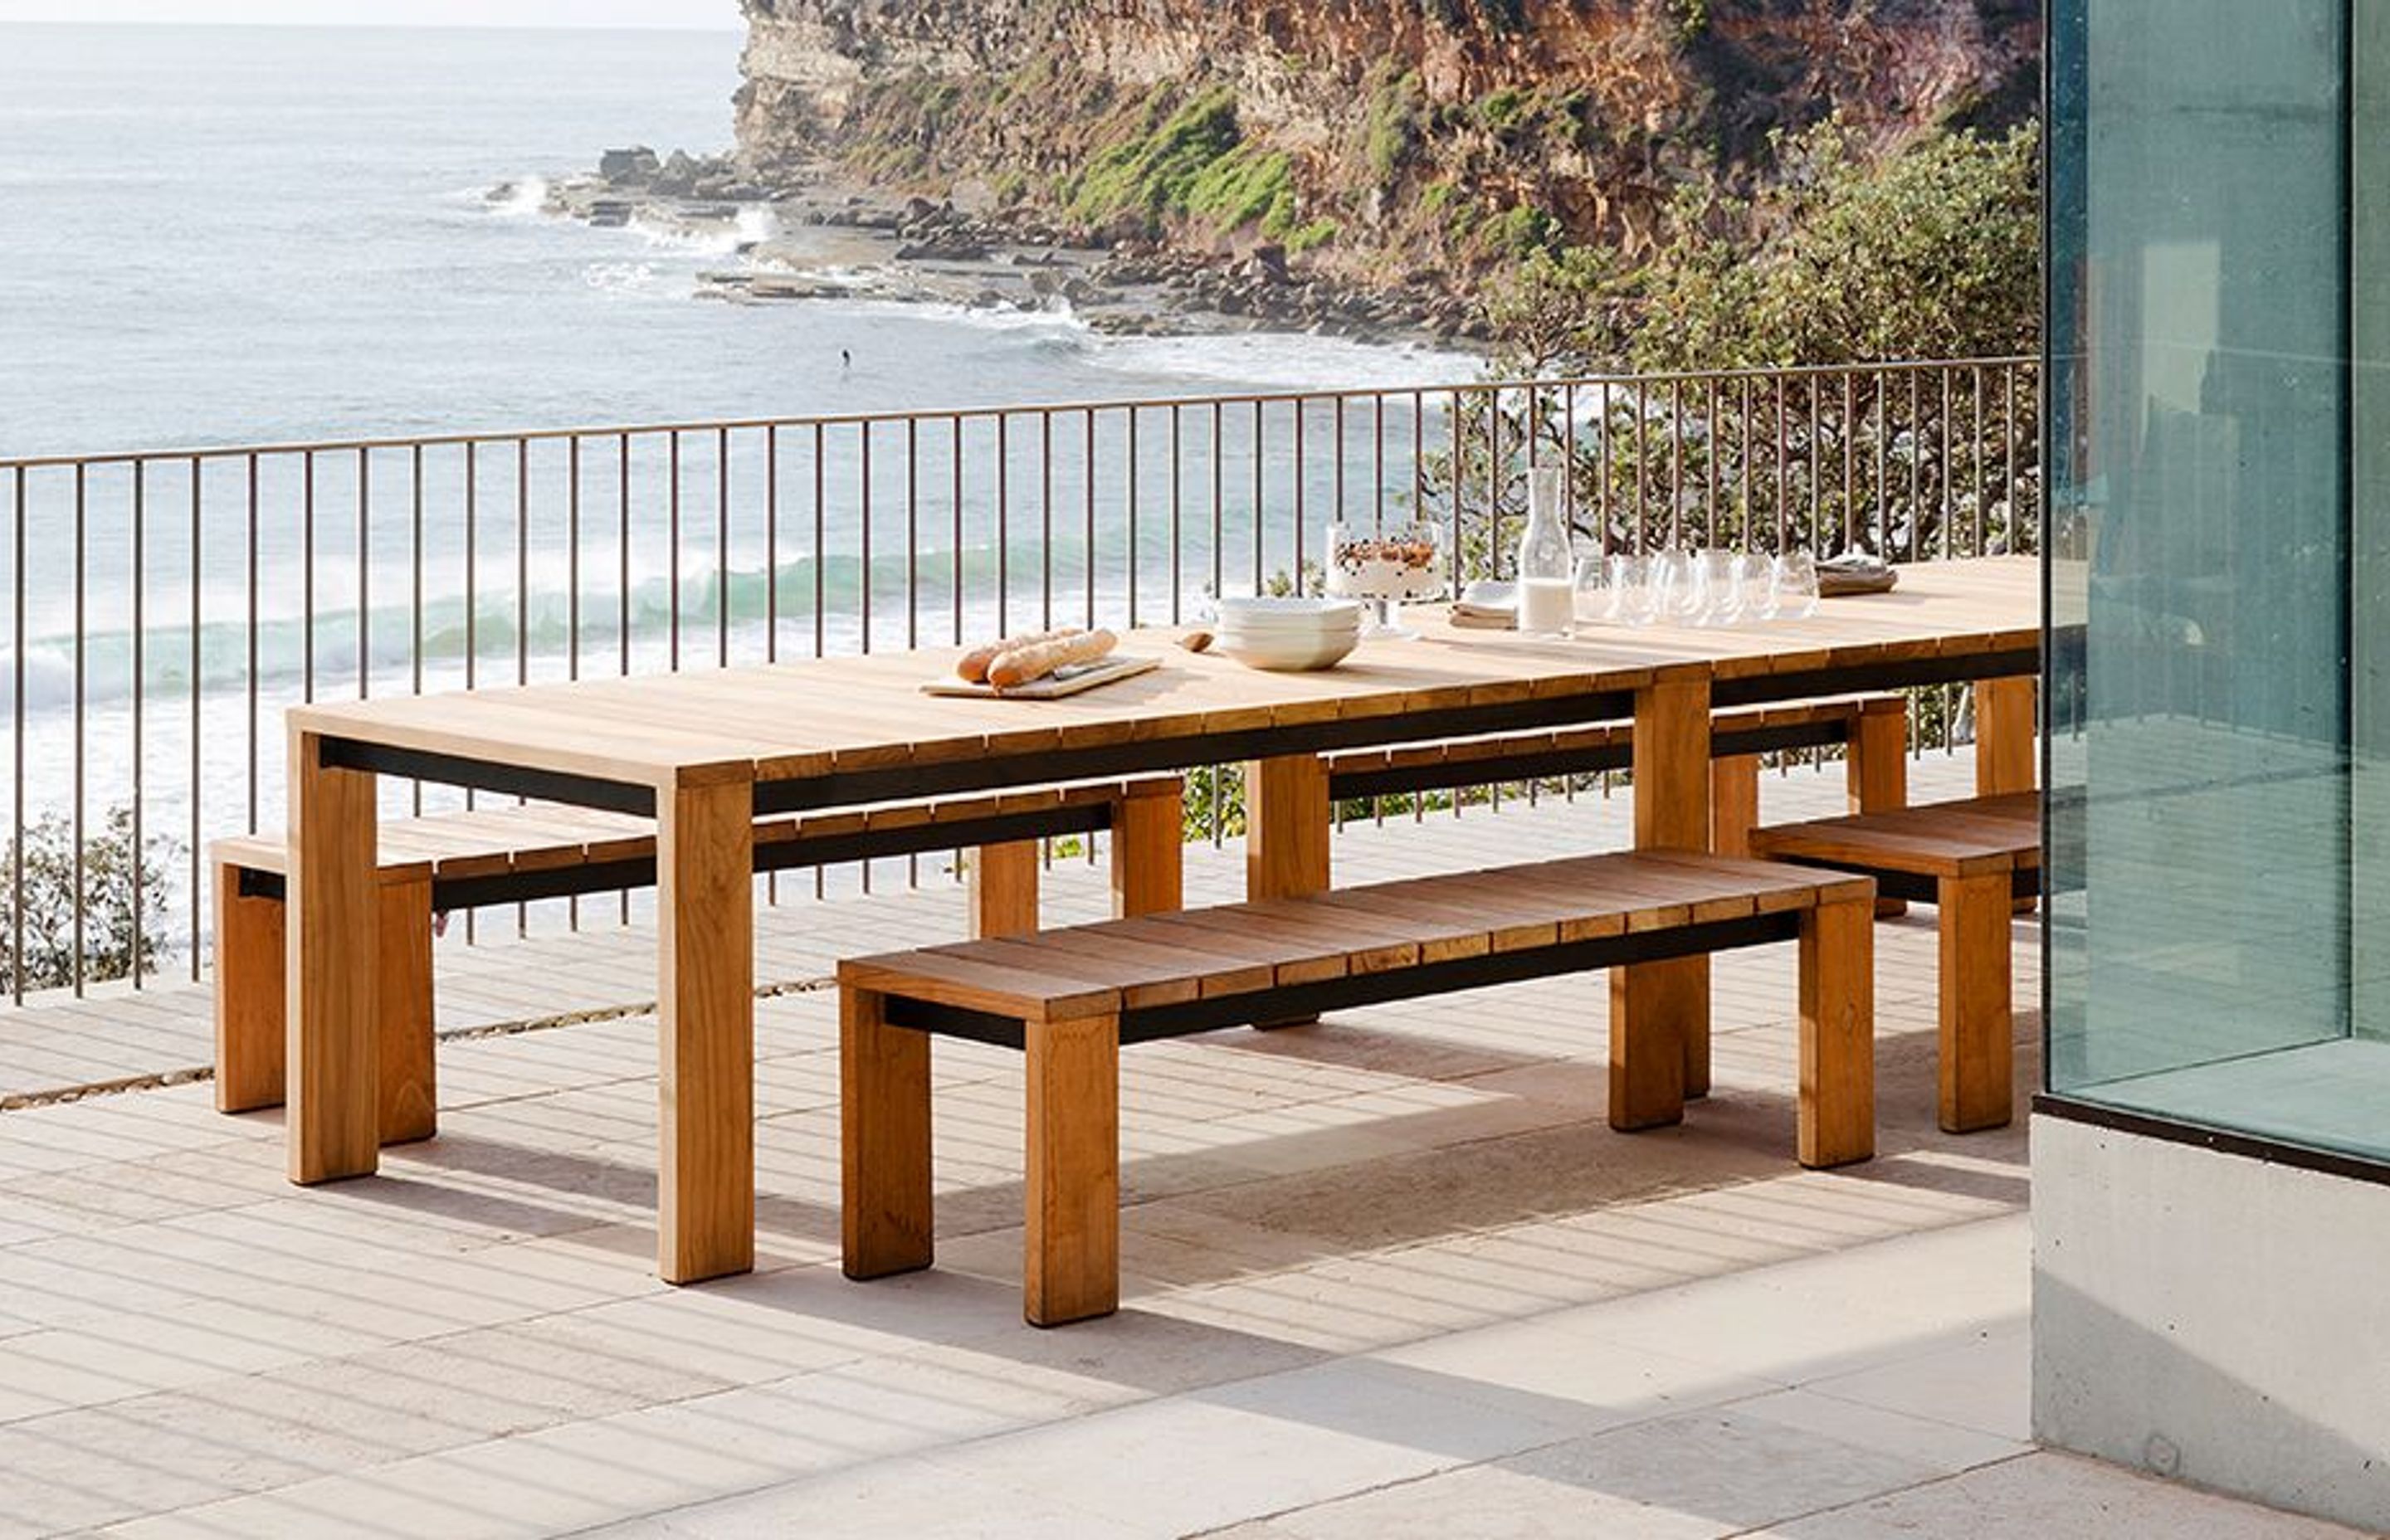 Choosing The Right Outdoor Dining Setting For Your Lifestyle